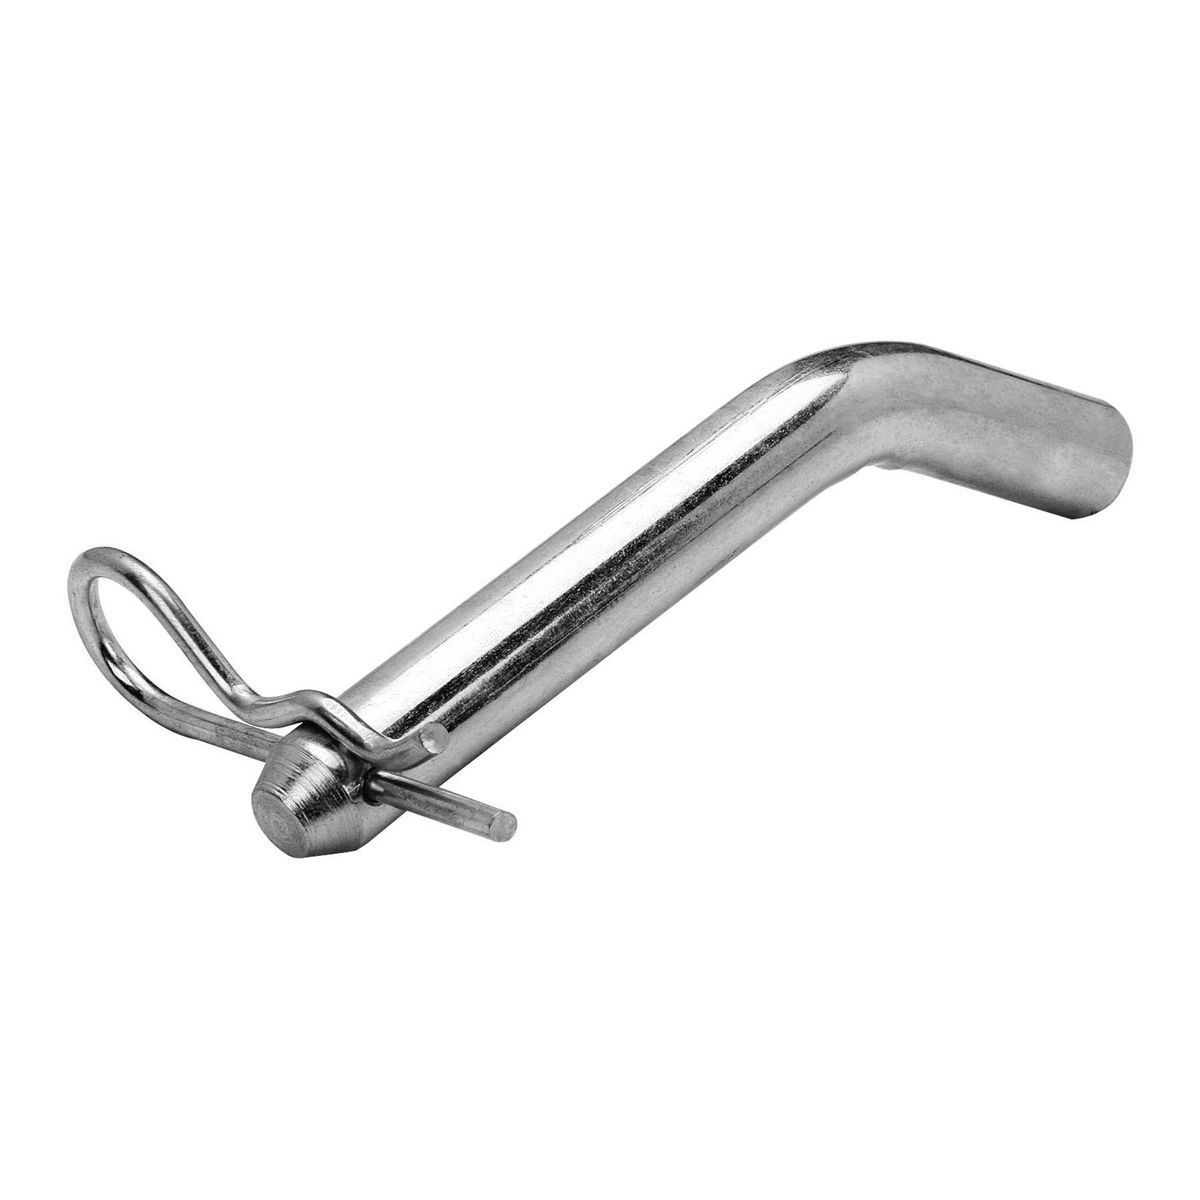 HAUL-MASTER 5/8" x 3" Hitch Pin with Clip